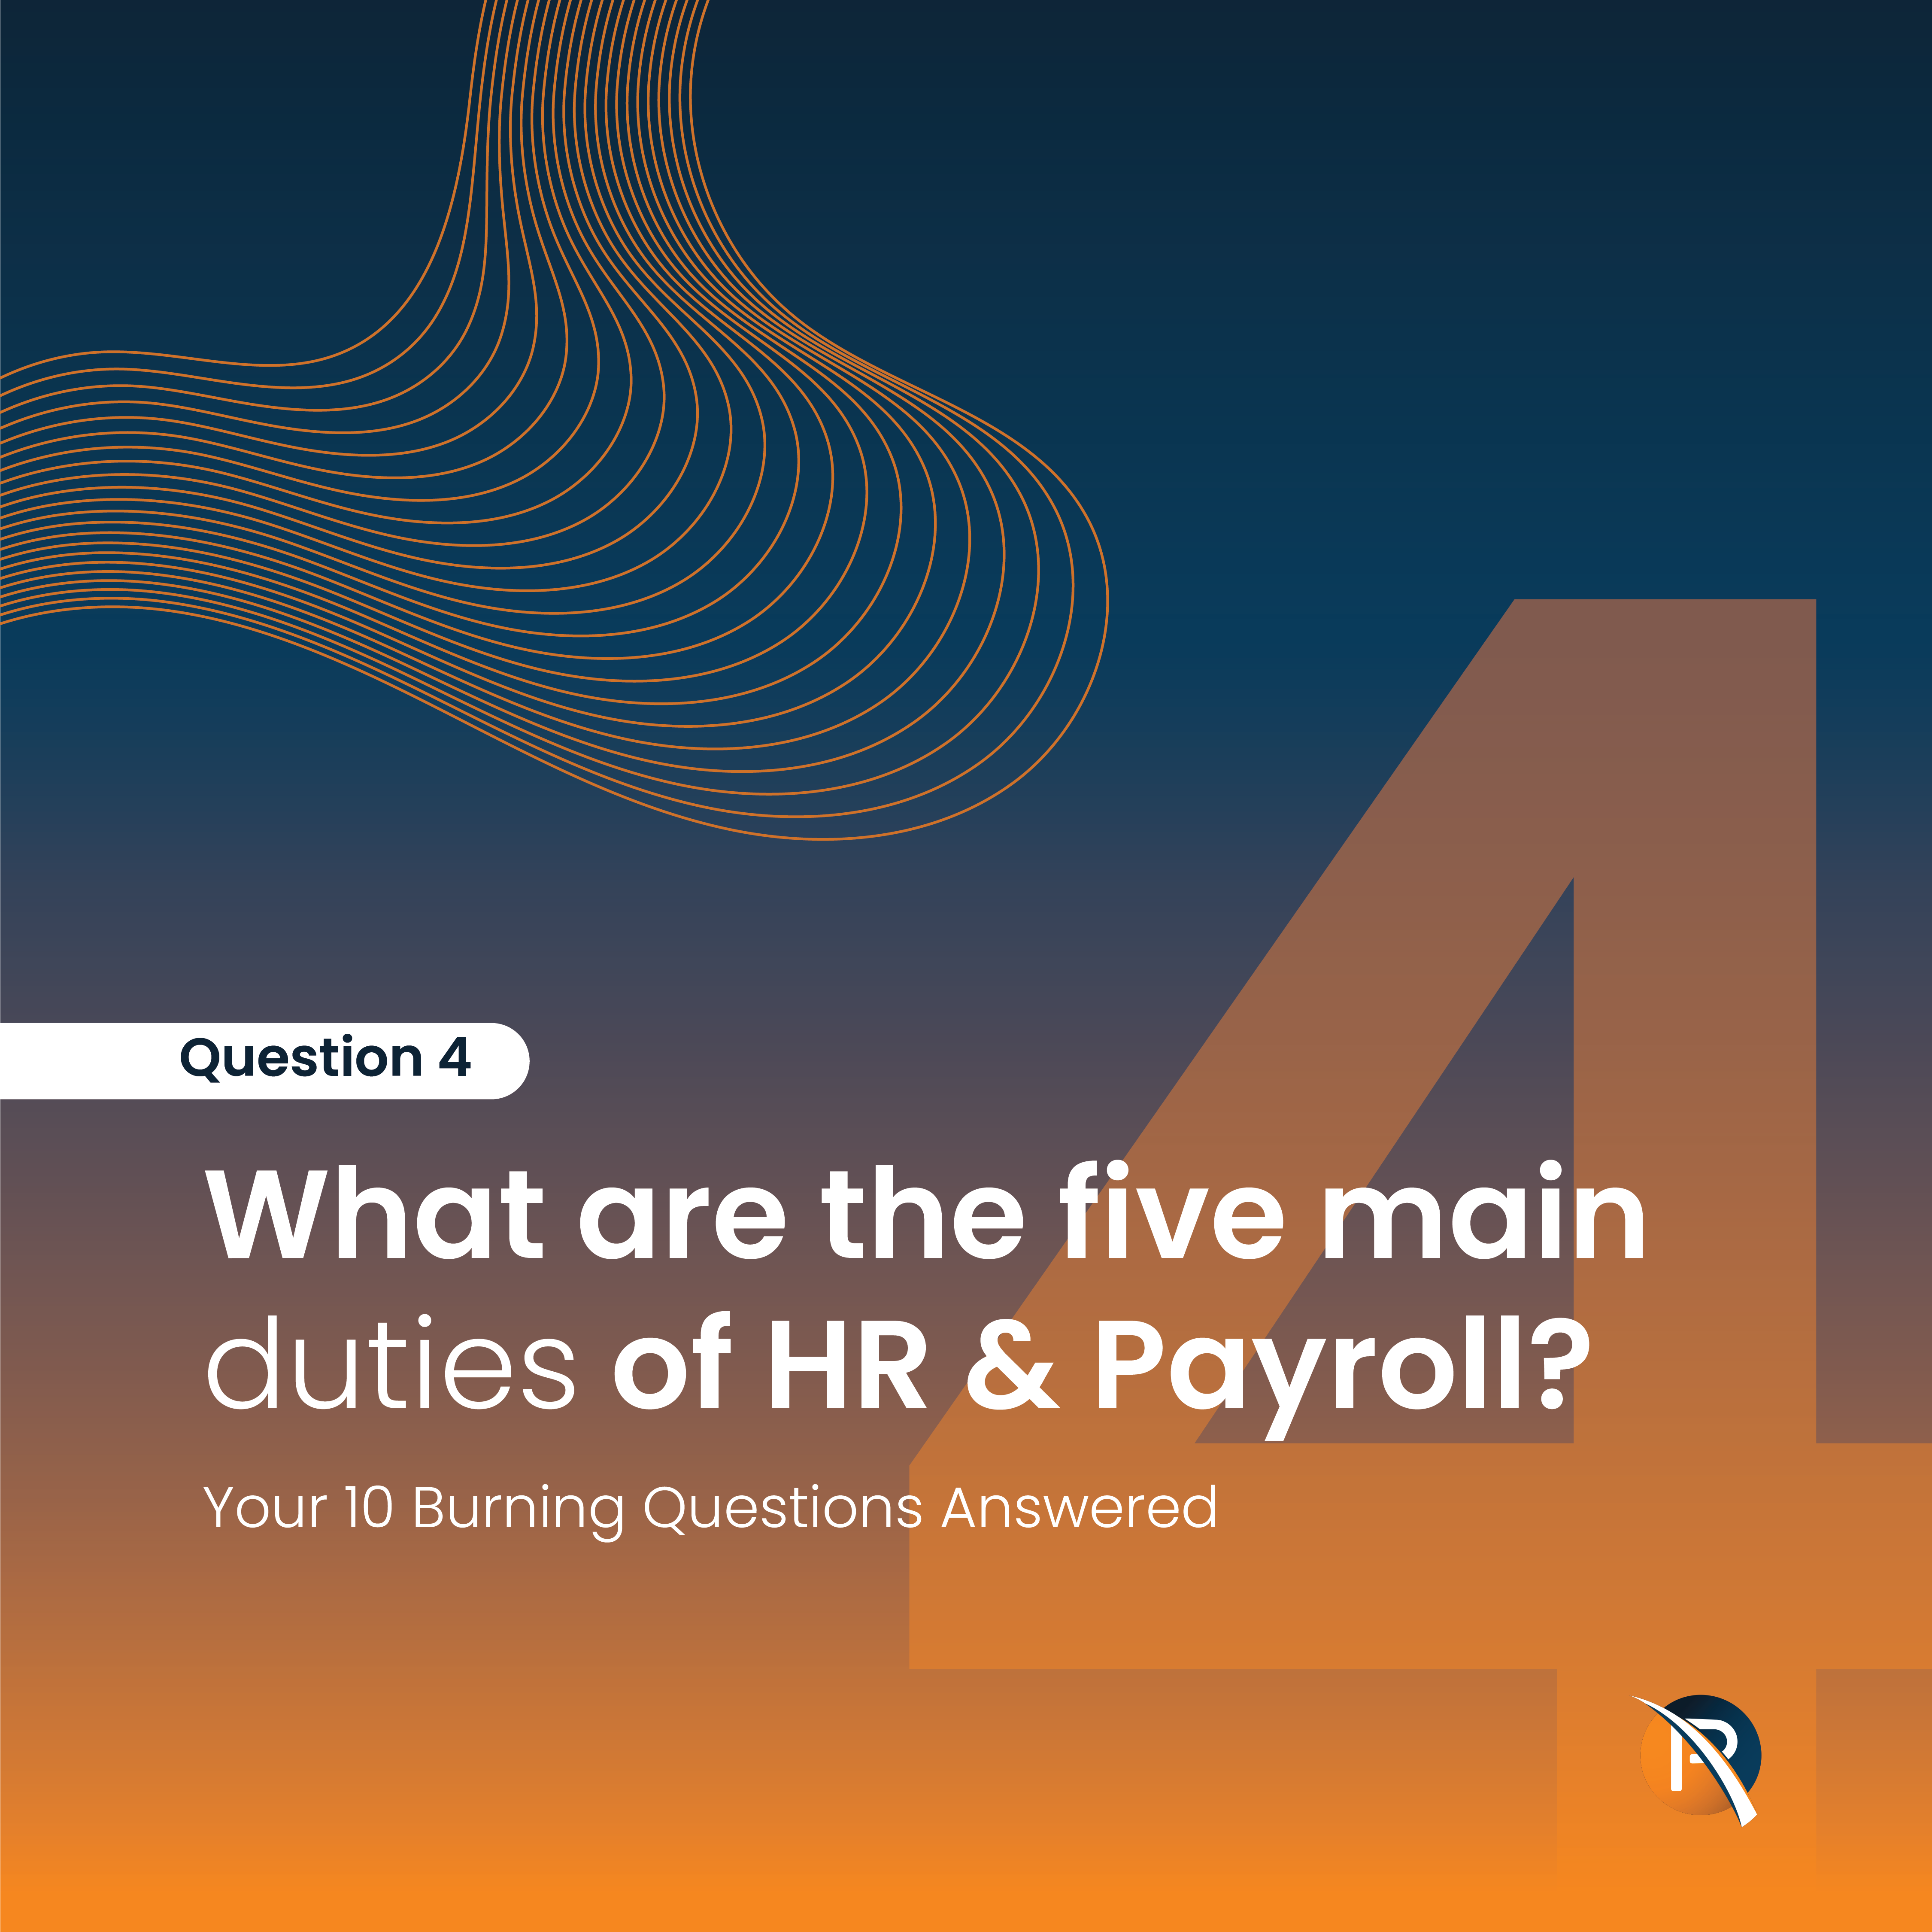 Main duties of HR and payroll